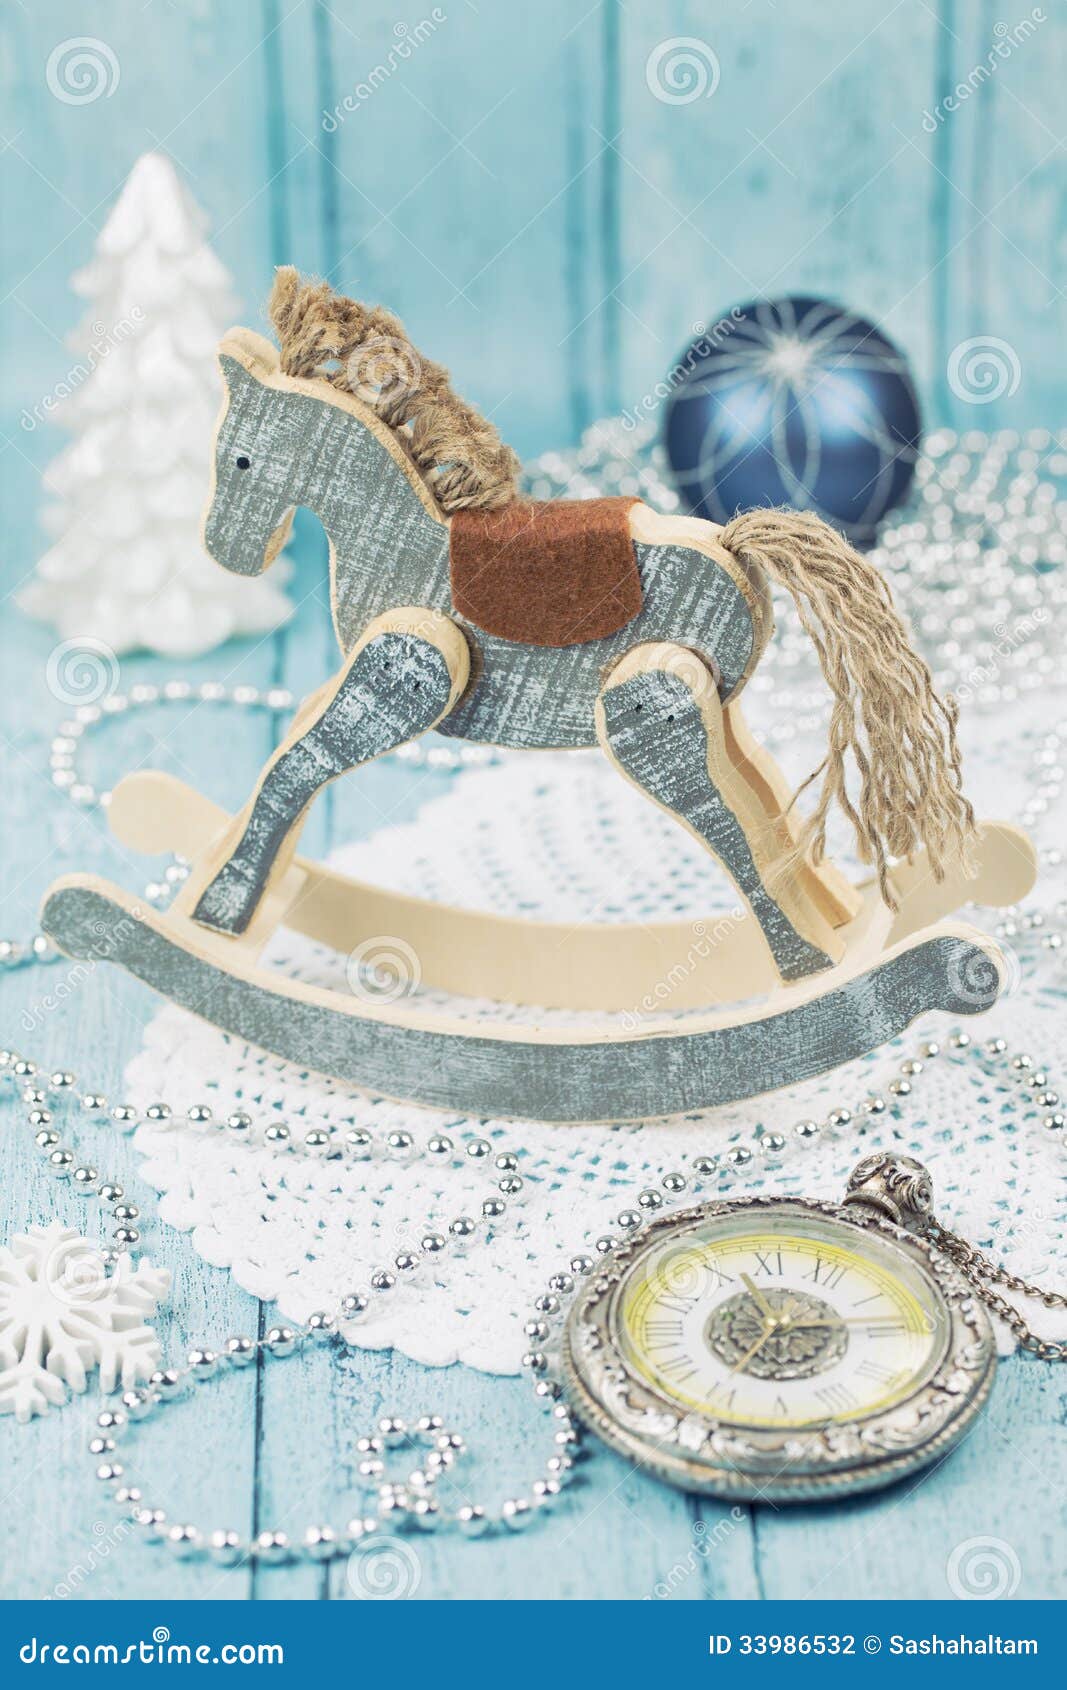 Wooden christmas horse. Wooden horse and clock with Christmas decoration on wooden background in vintage style